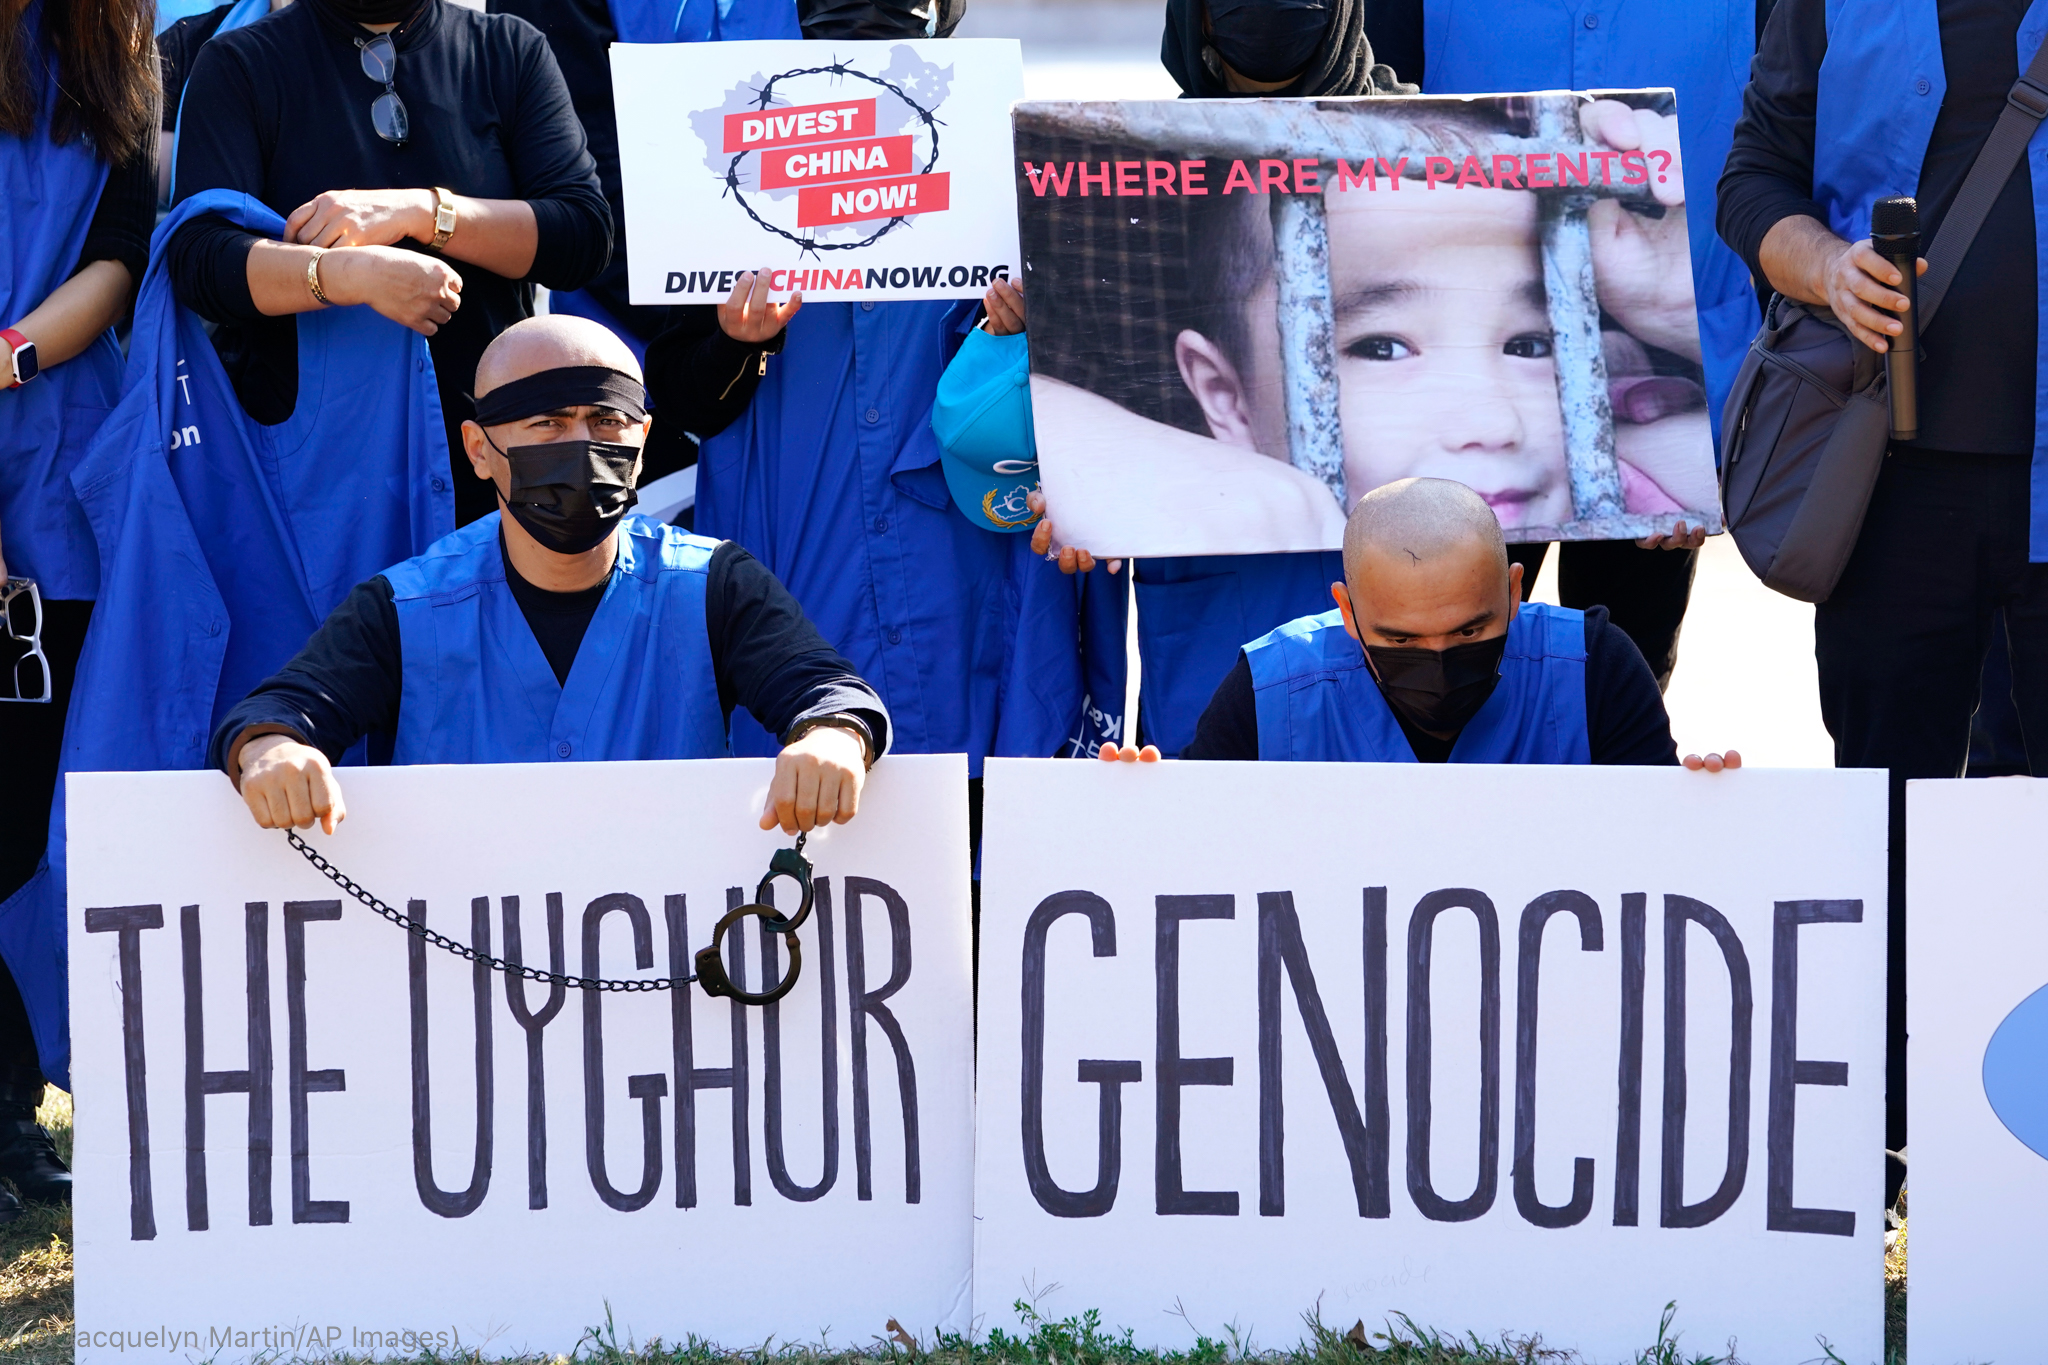 Facing China's Uyghur genocide at the UN, money talks and Islam walks 1